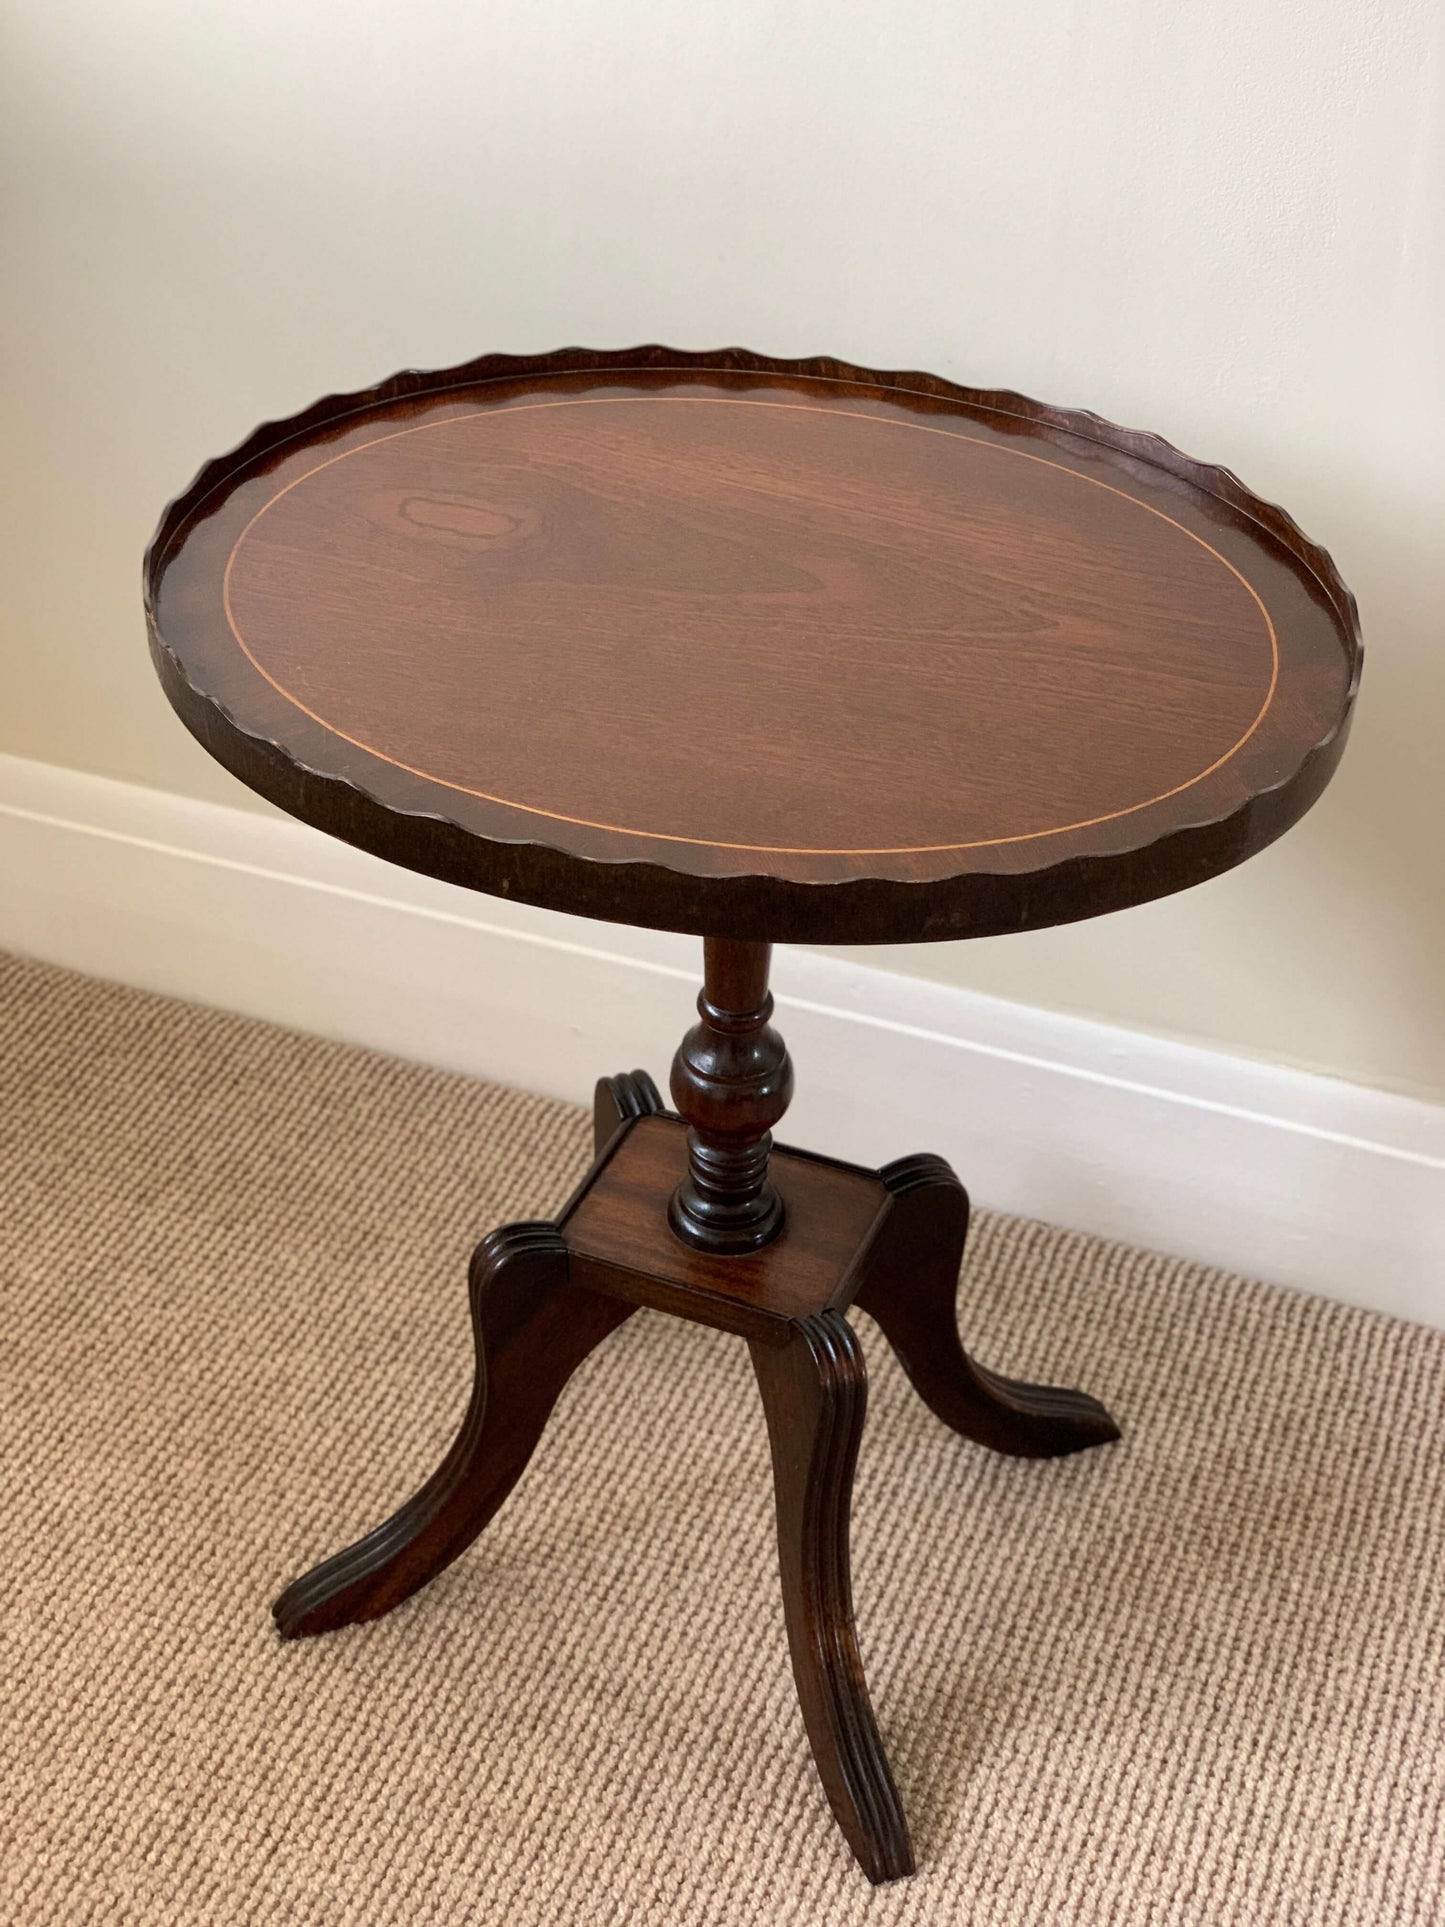 Vintage scallop-edged side table